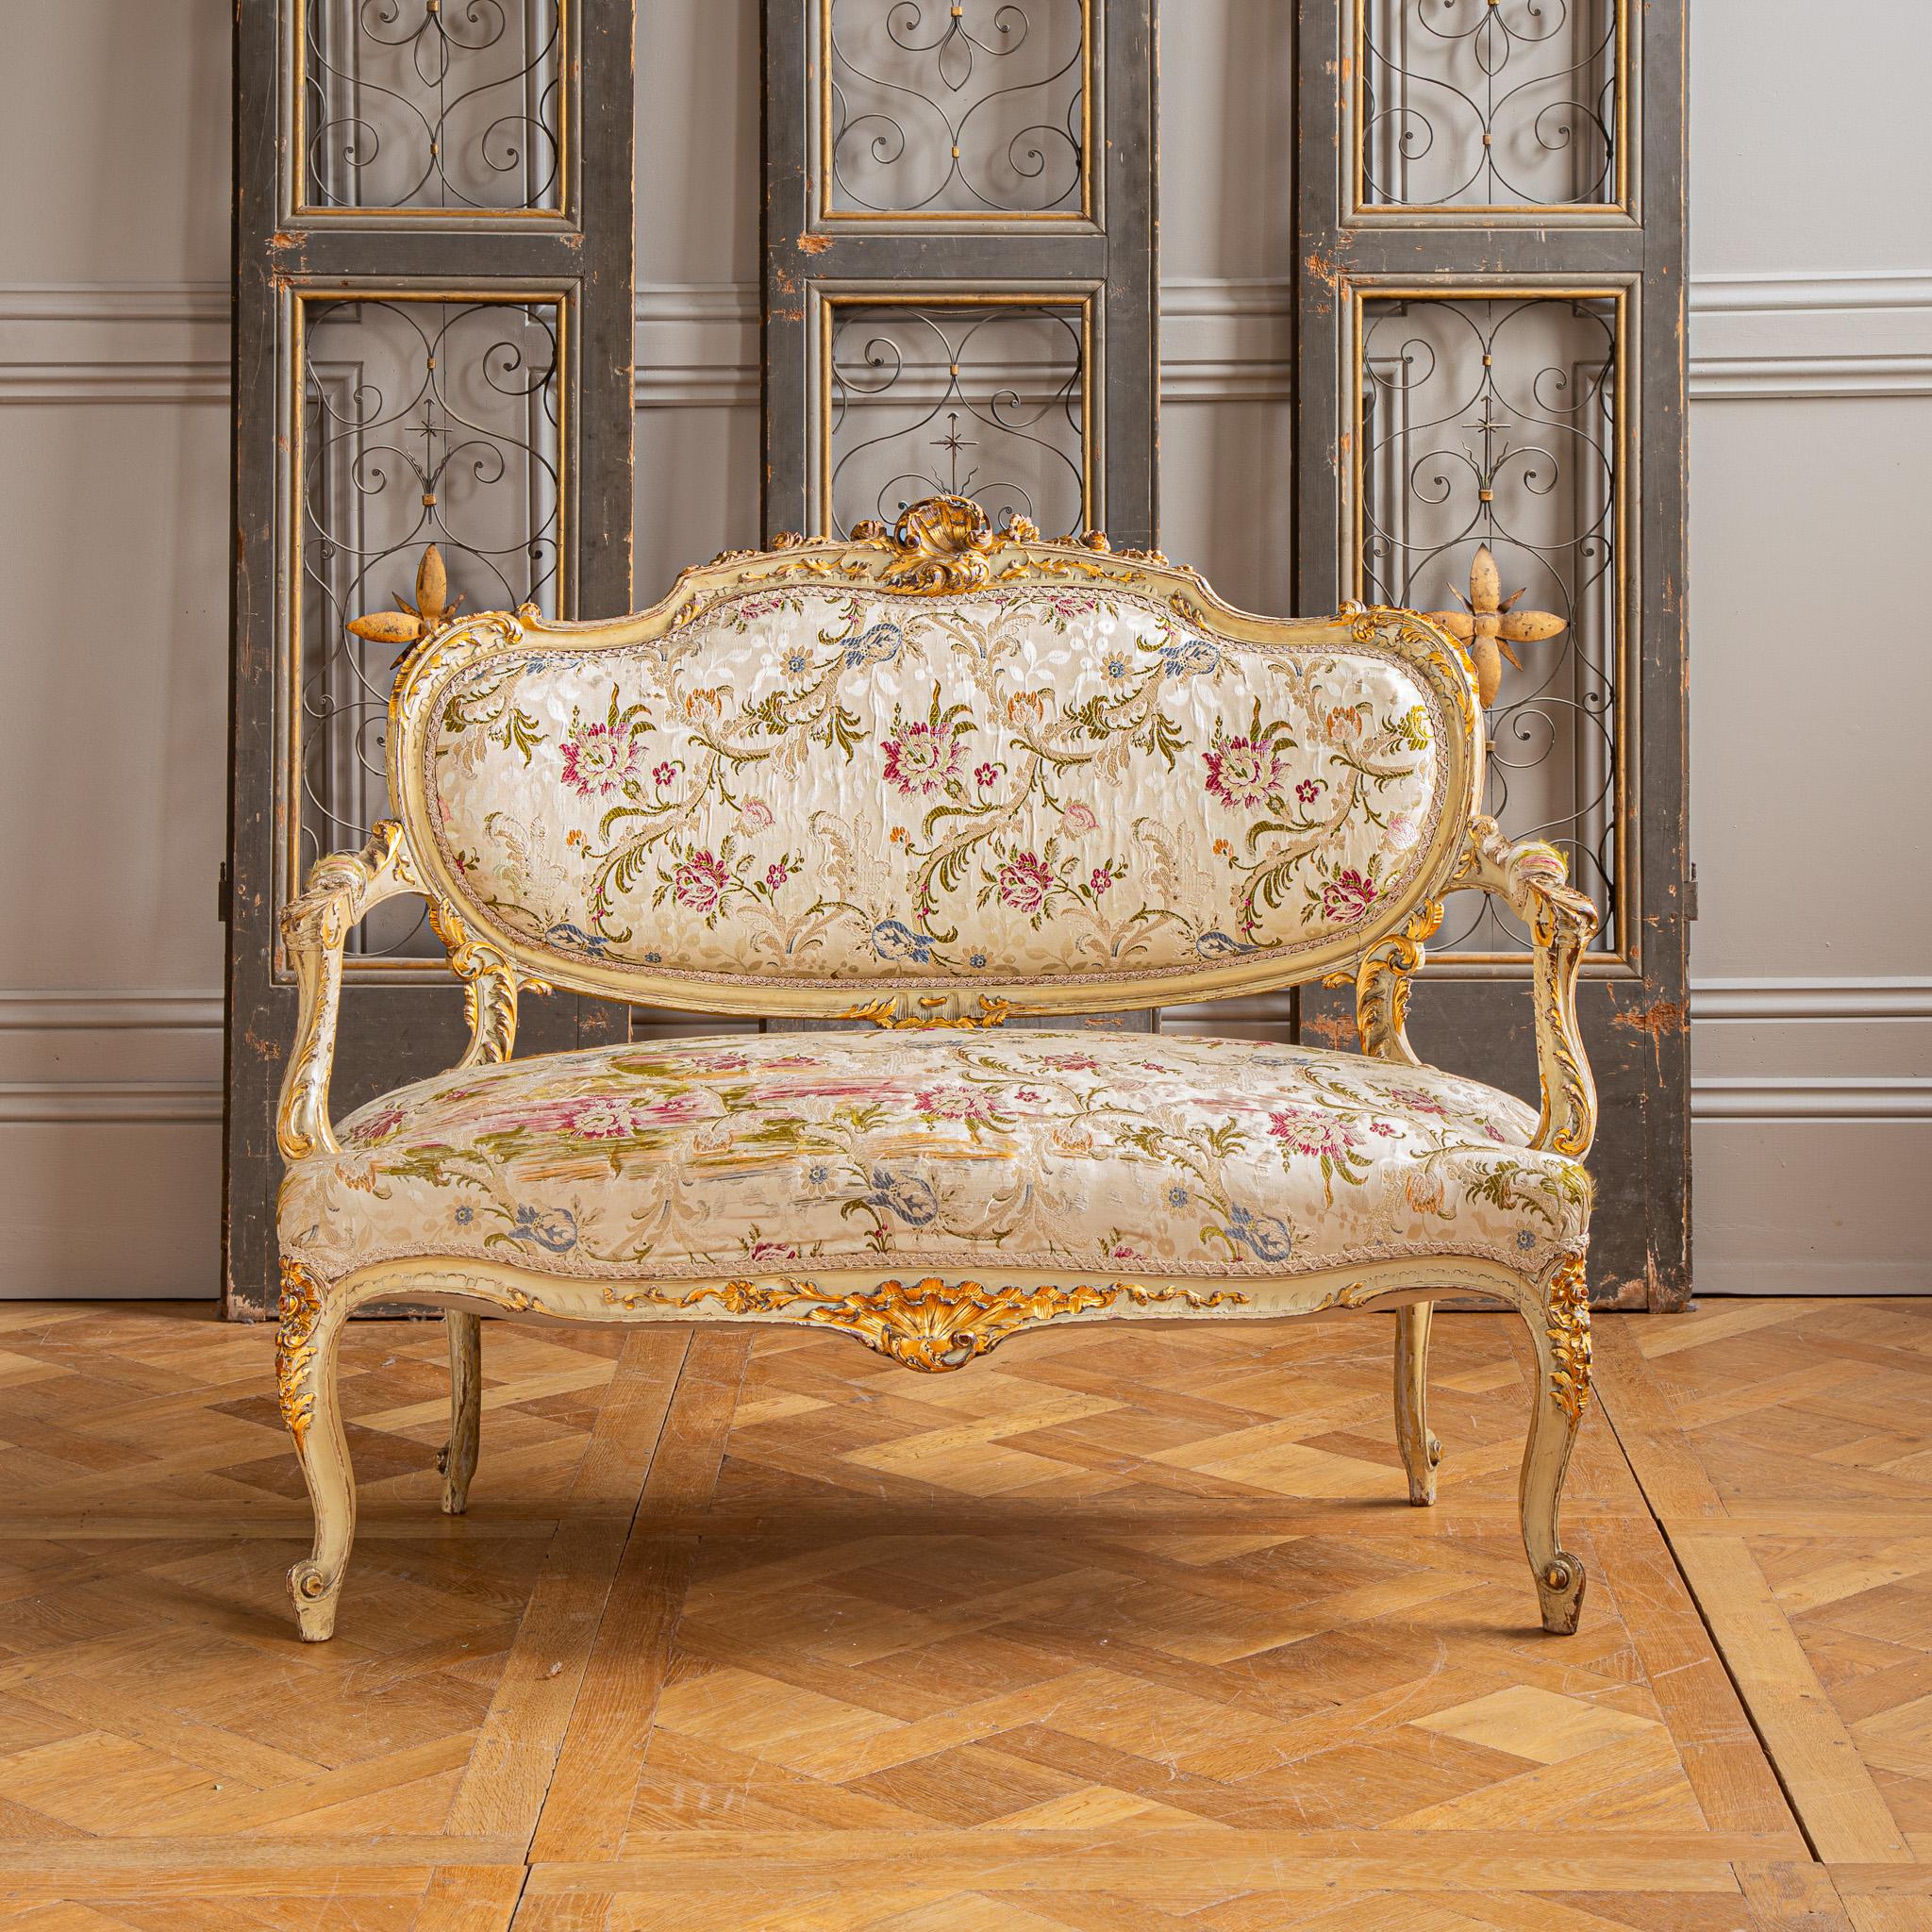 A nine piece Italian, Louis XV style, gilt-wood Suite. This masterfully handcrafted set includes one sofa, two armchairs with matching footstools, and four chairs, all unified by a aged cream finish with elegant gold highlights, showcasing a